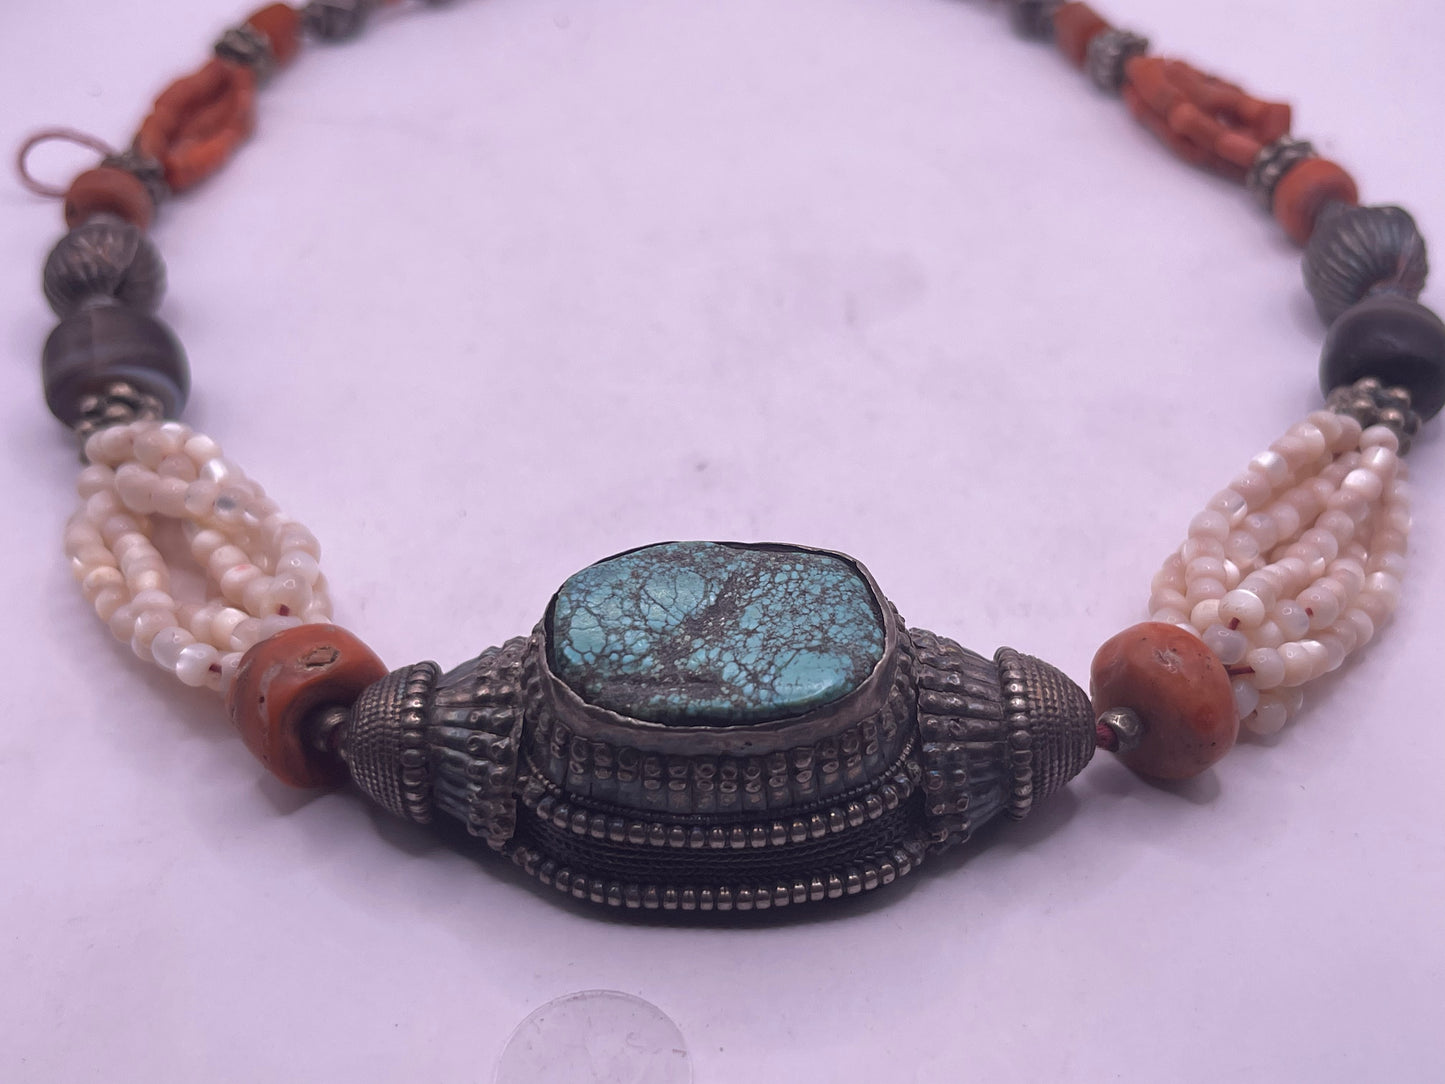 Antique turquoise hair bead necklace